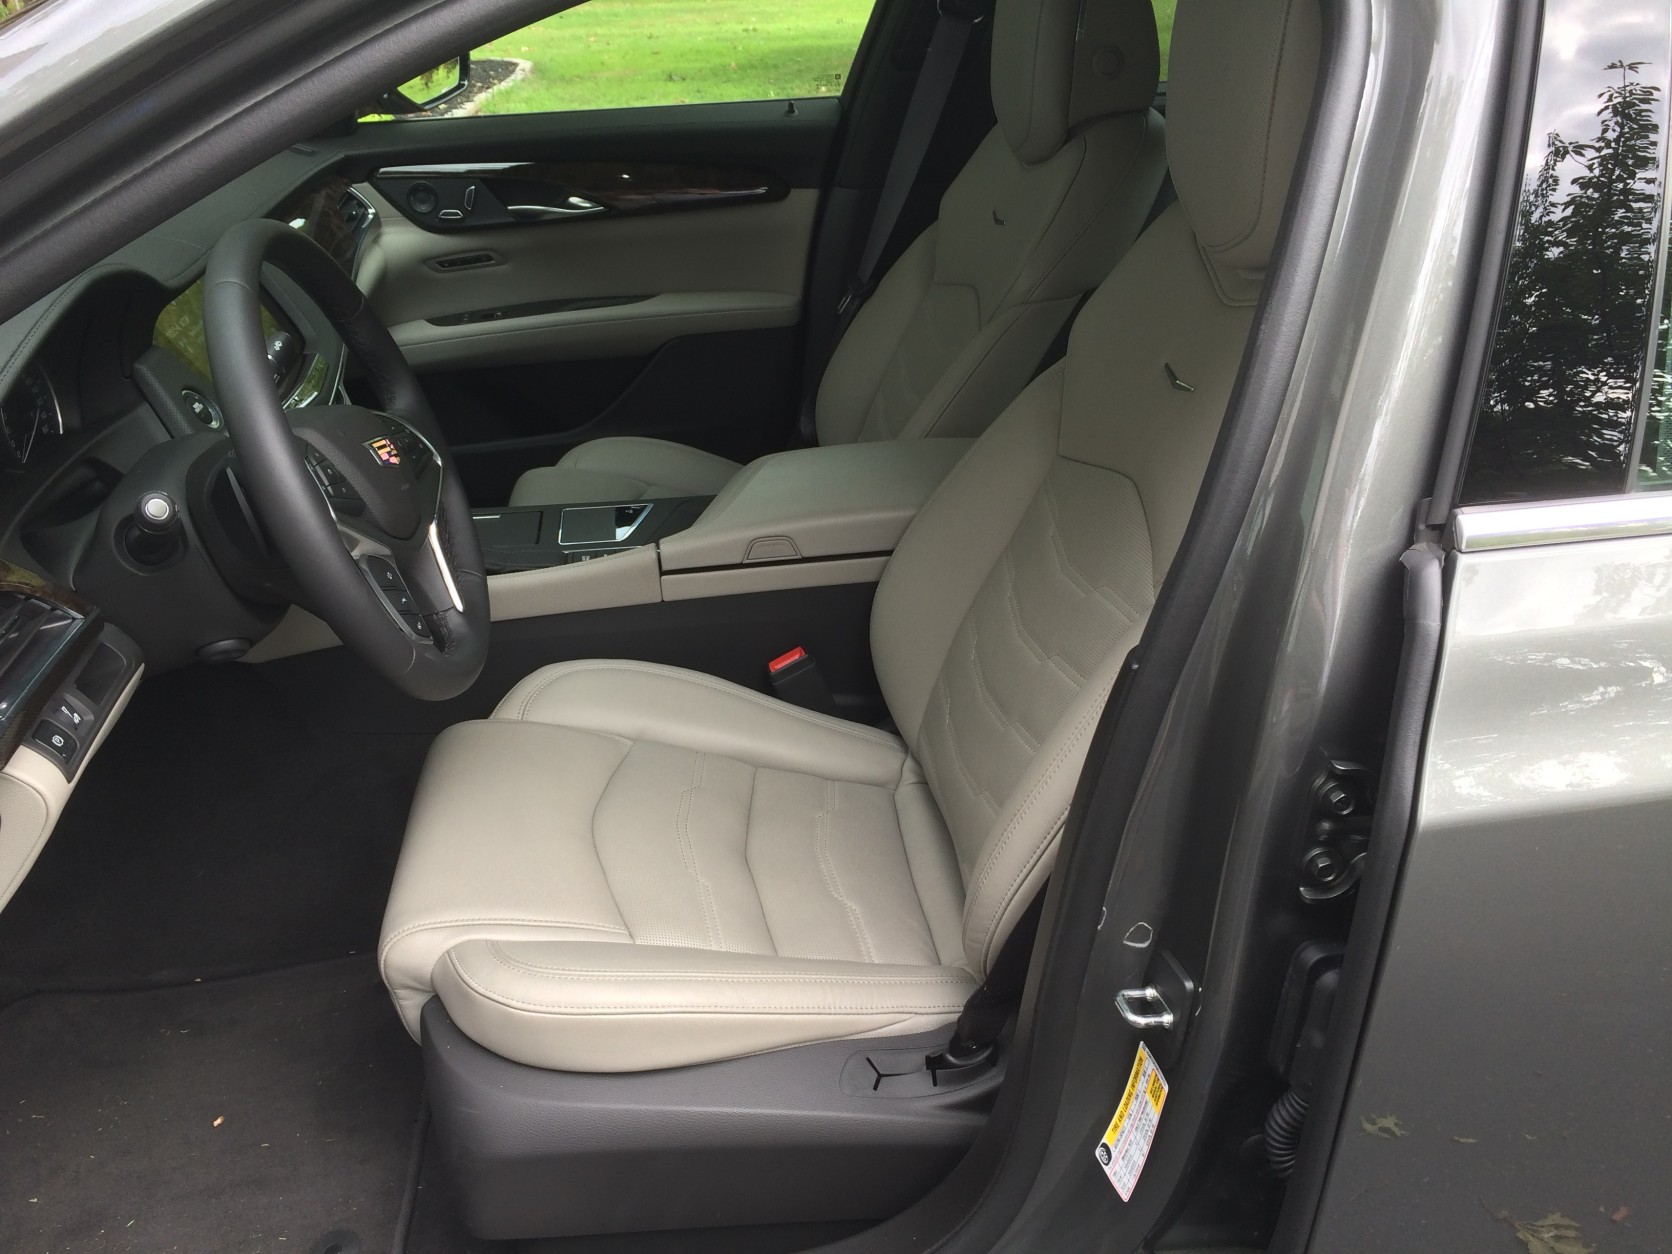 The interior is probably the best of the Cadillacs with nice materials and shapes with comfortable heated and ventilated front seats, though you might slide around a bit in some fast tight corners. (WTOP/Mike Parris)